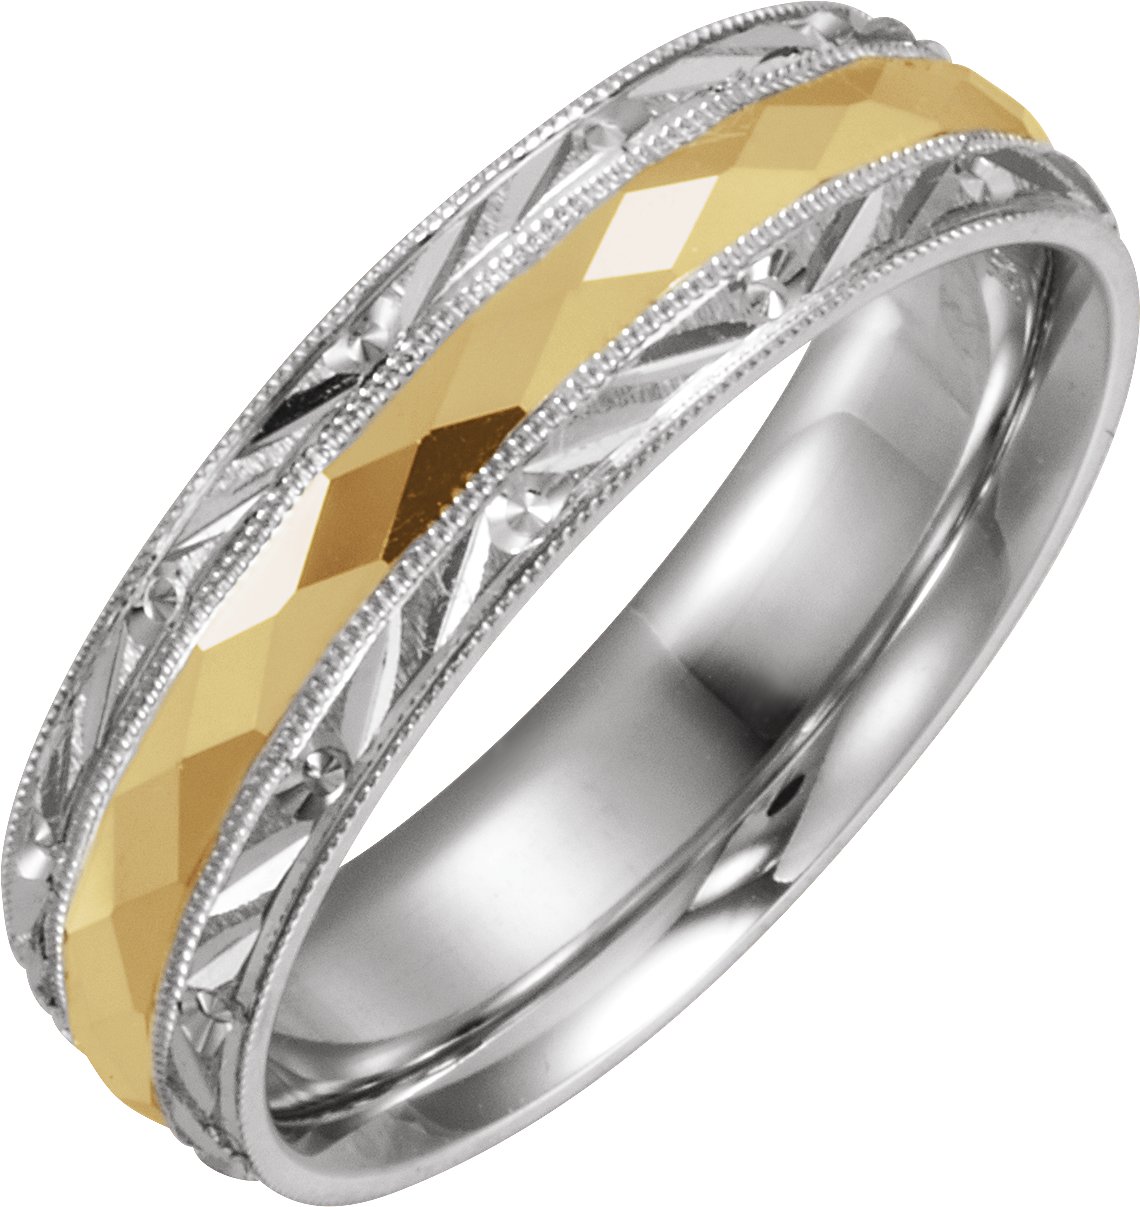 14K White Yellow 6 mm Design Engraved Band with Milgrain Size 8.5 Ref 14716612